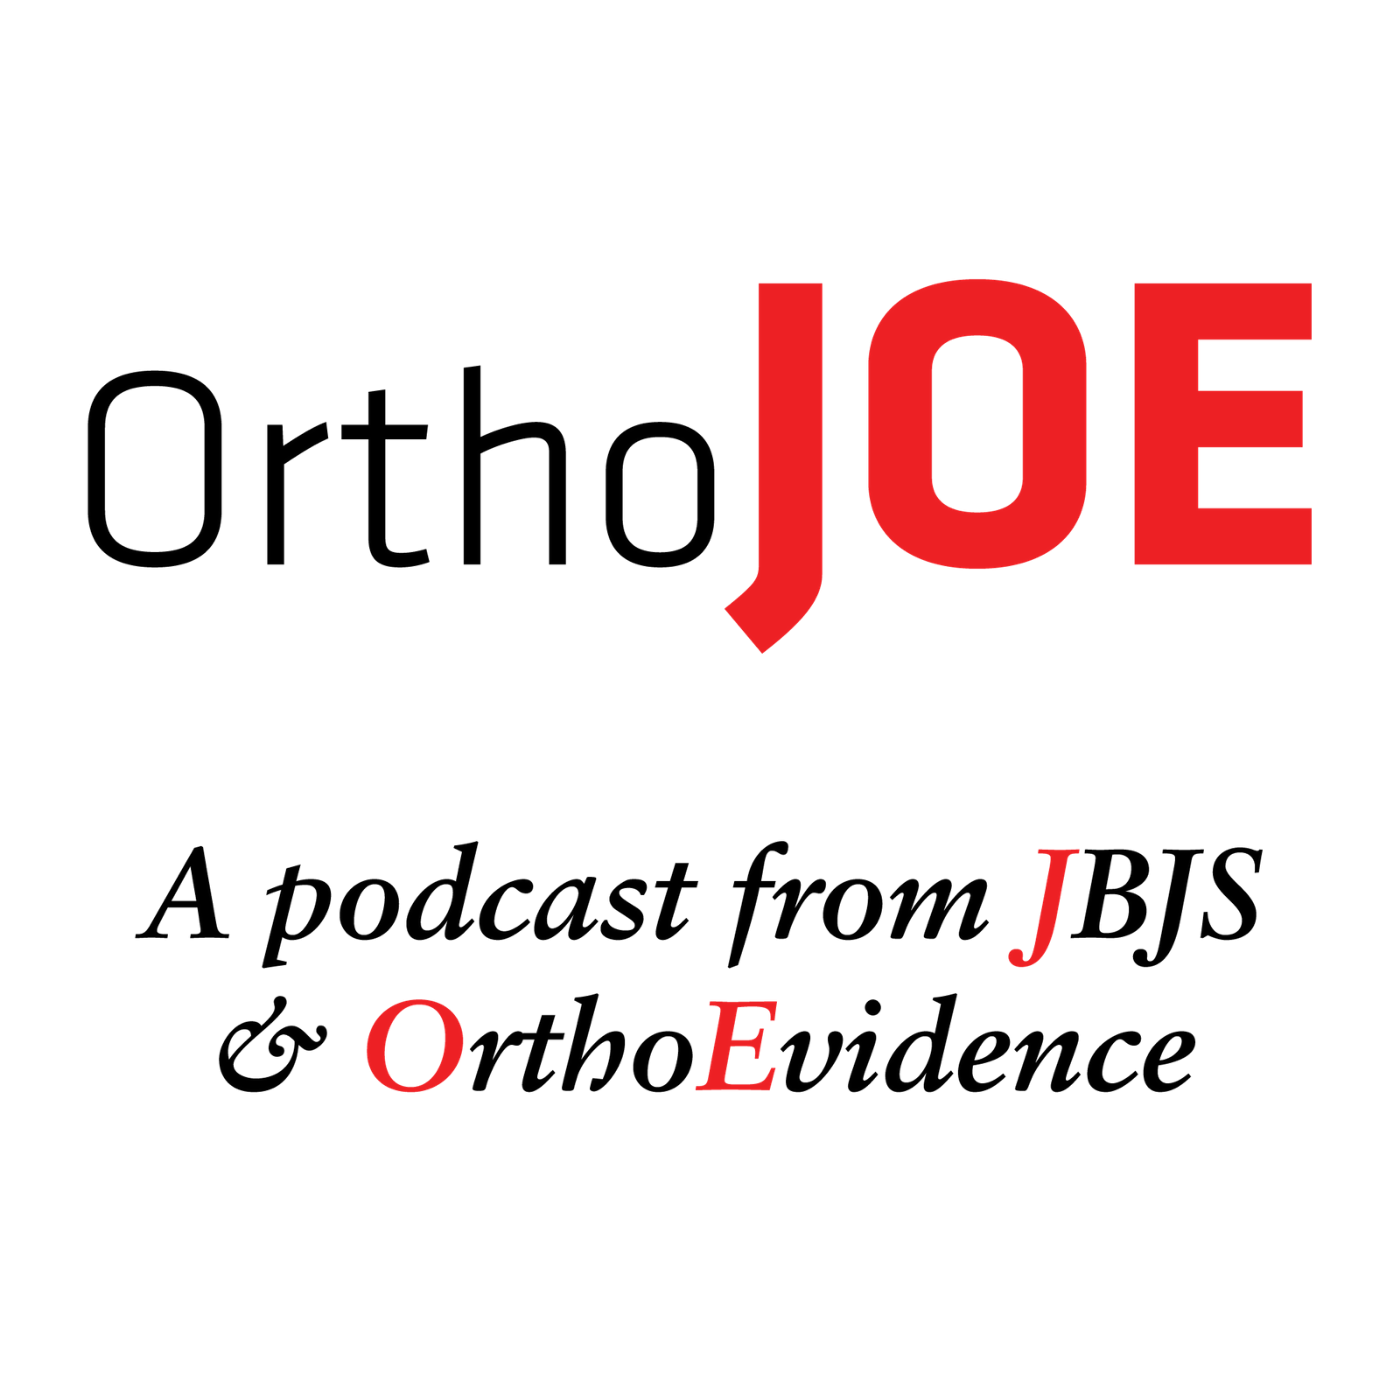 JBJS Past, Present, and Future: The Evolving Role of Editors in Orthopaedic Publishing